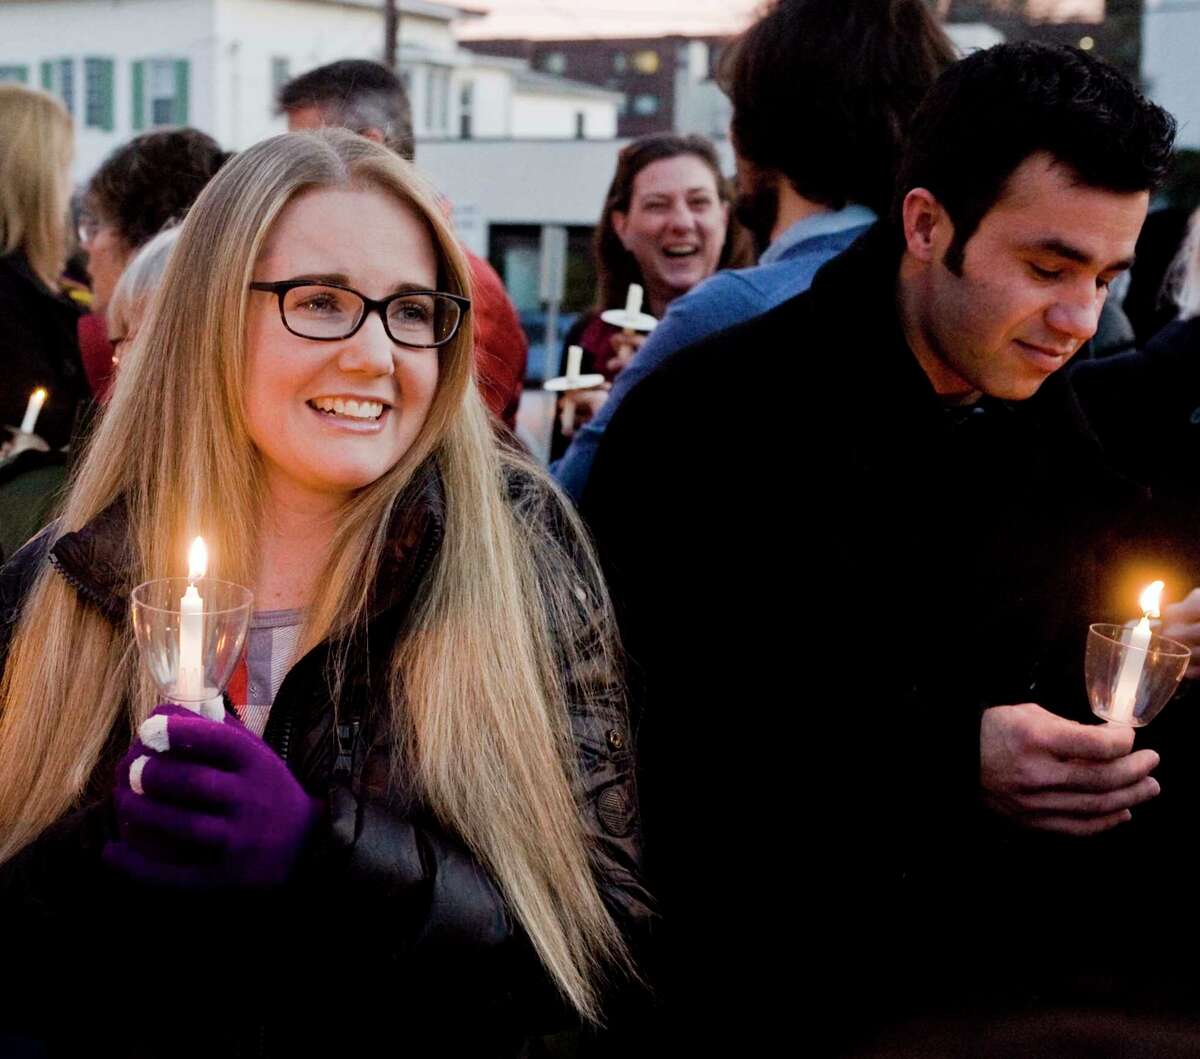 Samantha and Joel Colindres during a candlelight vigil at Central Christian Church in Danbury for the Colindres family. Sunday, Jan. 21, 2018